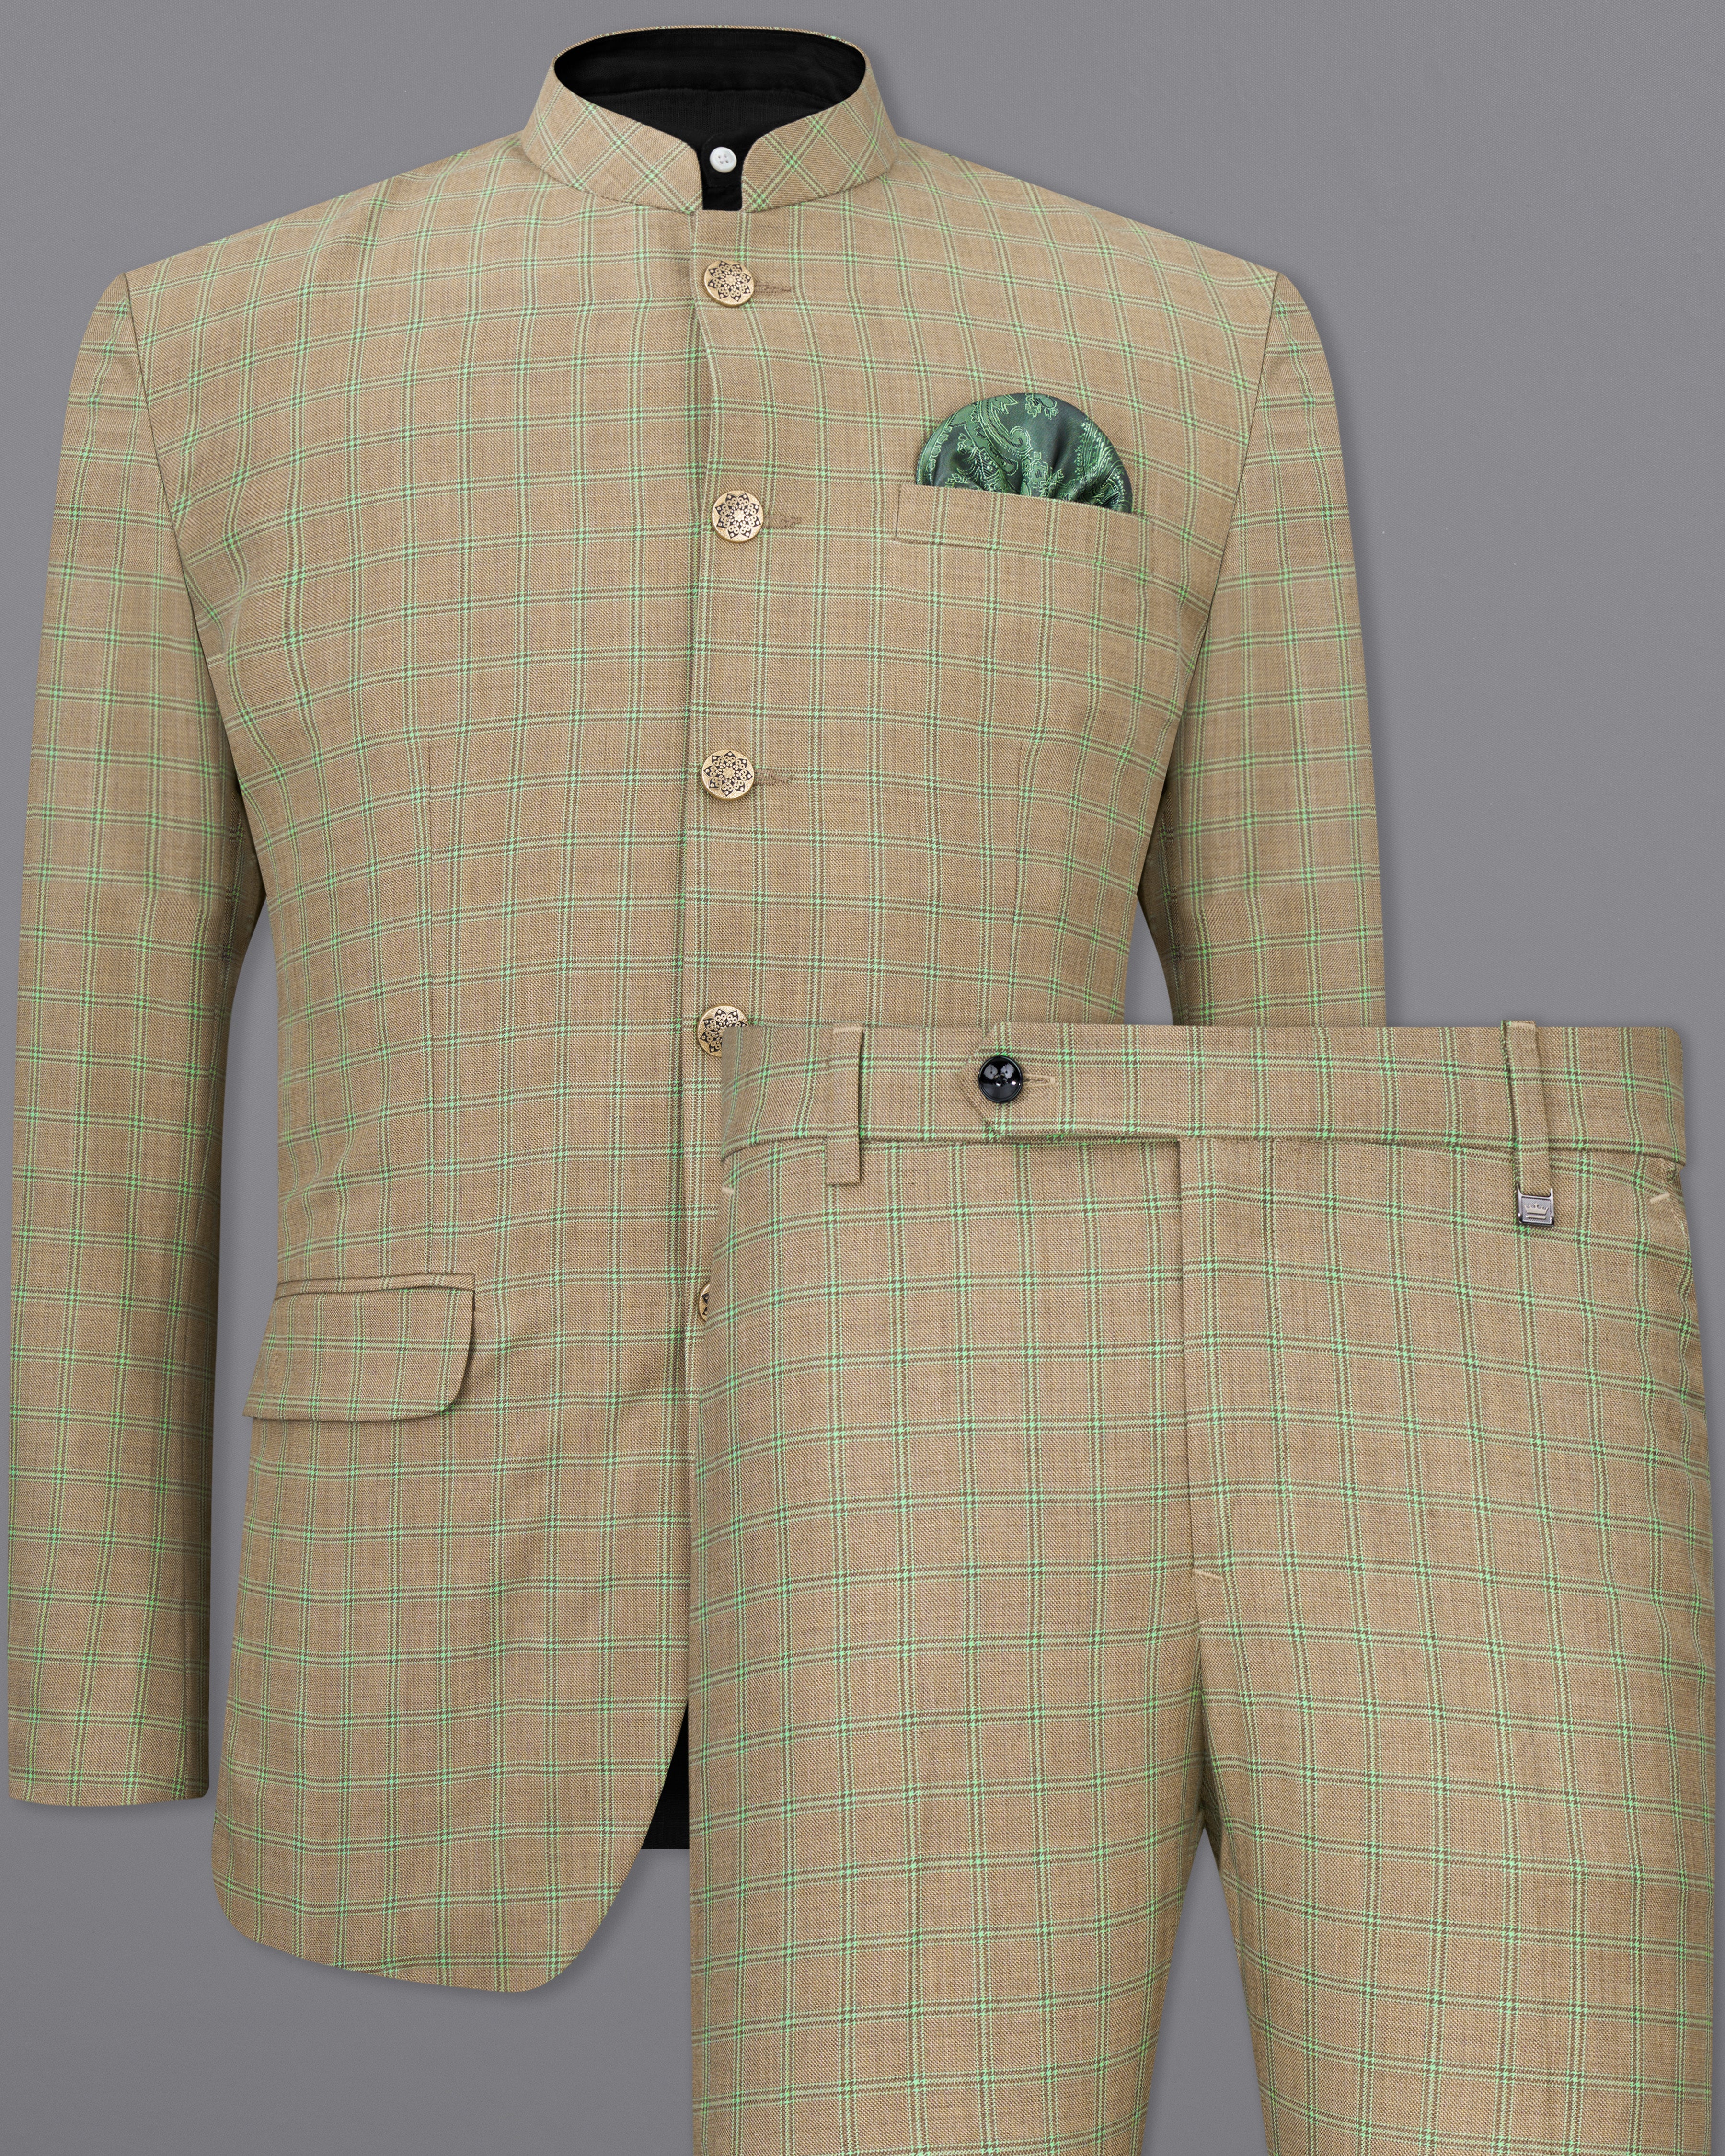 Sandrift Brown with Sprout Green Plaid Bandhgala Suit ST2483-BG-36, ST2483-BG-38, ST2483-BG-40, ST2483-BG-42, ST2483-BG-44, ST2483-BG-46, ST2483-BG-48, ST2483-BG-50, ST2483-BG-52, ST2483-BG-54, ST2483-BG-56, ST2483-BG-58, ST2483-BG-60